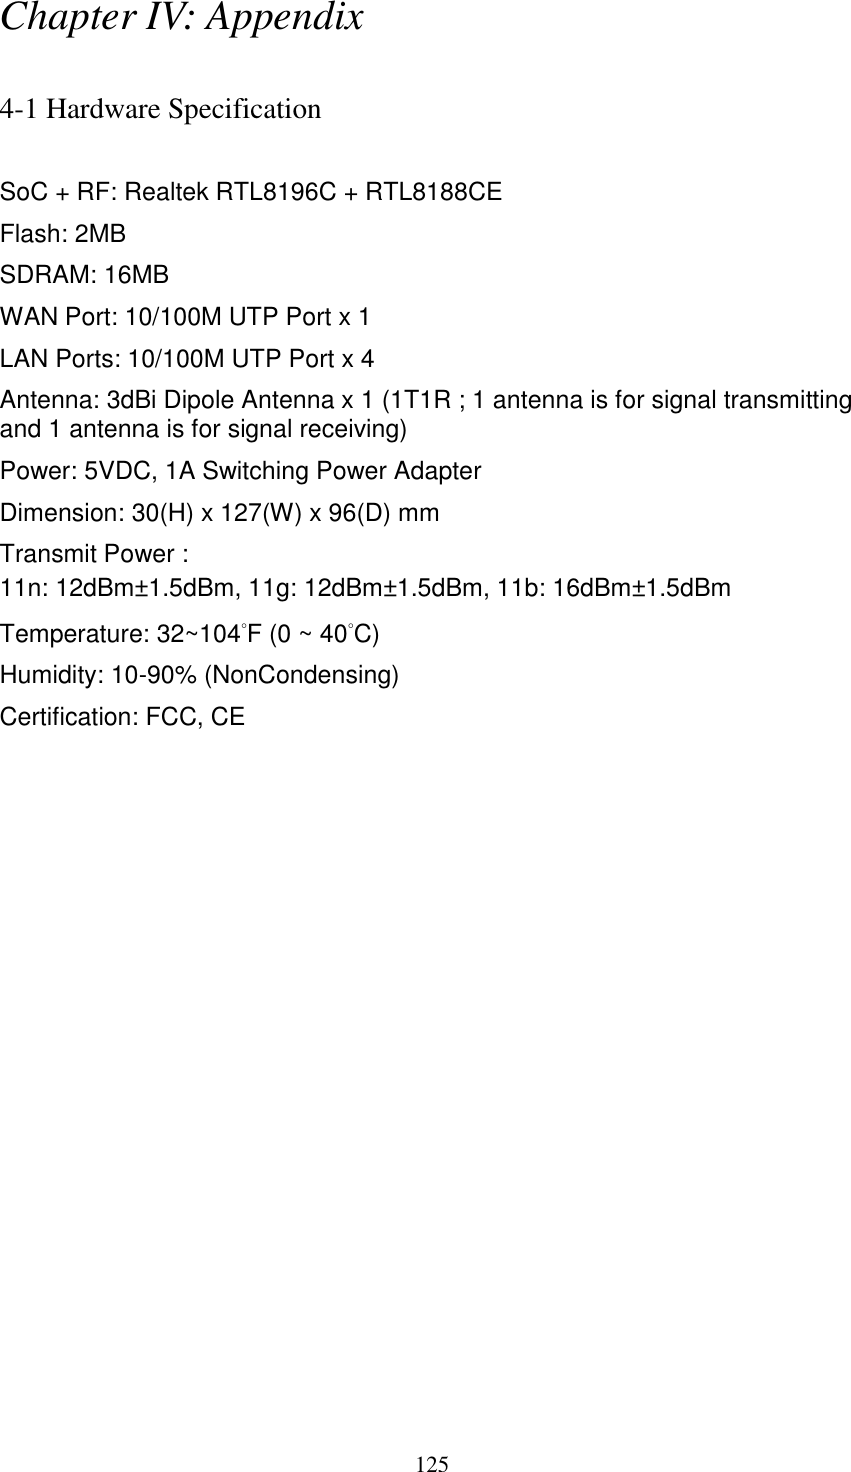 125 Chapter IV: Appendix  4-1 Hardware Specification  SoC + RF: Realtek RTL8196C + RTL8188CE Flash: 2MB SDRAM: 16MB WAN Port: 10/100M UTP Port x 1 LAN Ports: 10/100M UTP Port x 4 Antenna: 3dBi Dipole Antenna x 1 (1T1R ; 1 antenna is for signal transmitting and 1 antenna is for signal receiving) Power: 5VDC, 1A Switching Power Adapter Dimension: 30(H) x 127(W) x 96(D) mm   Transmit Power : 11n: 12dBm±1.5dBm, 11g: 12dBm±1.5dBm, 11b: 16dBm±1.5dBm   Temperature: 32~104°F (0 ~ 40°C) Humidity: 10-90% (NonCondensing) Certification: FCC, CE 